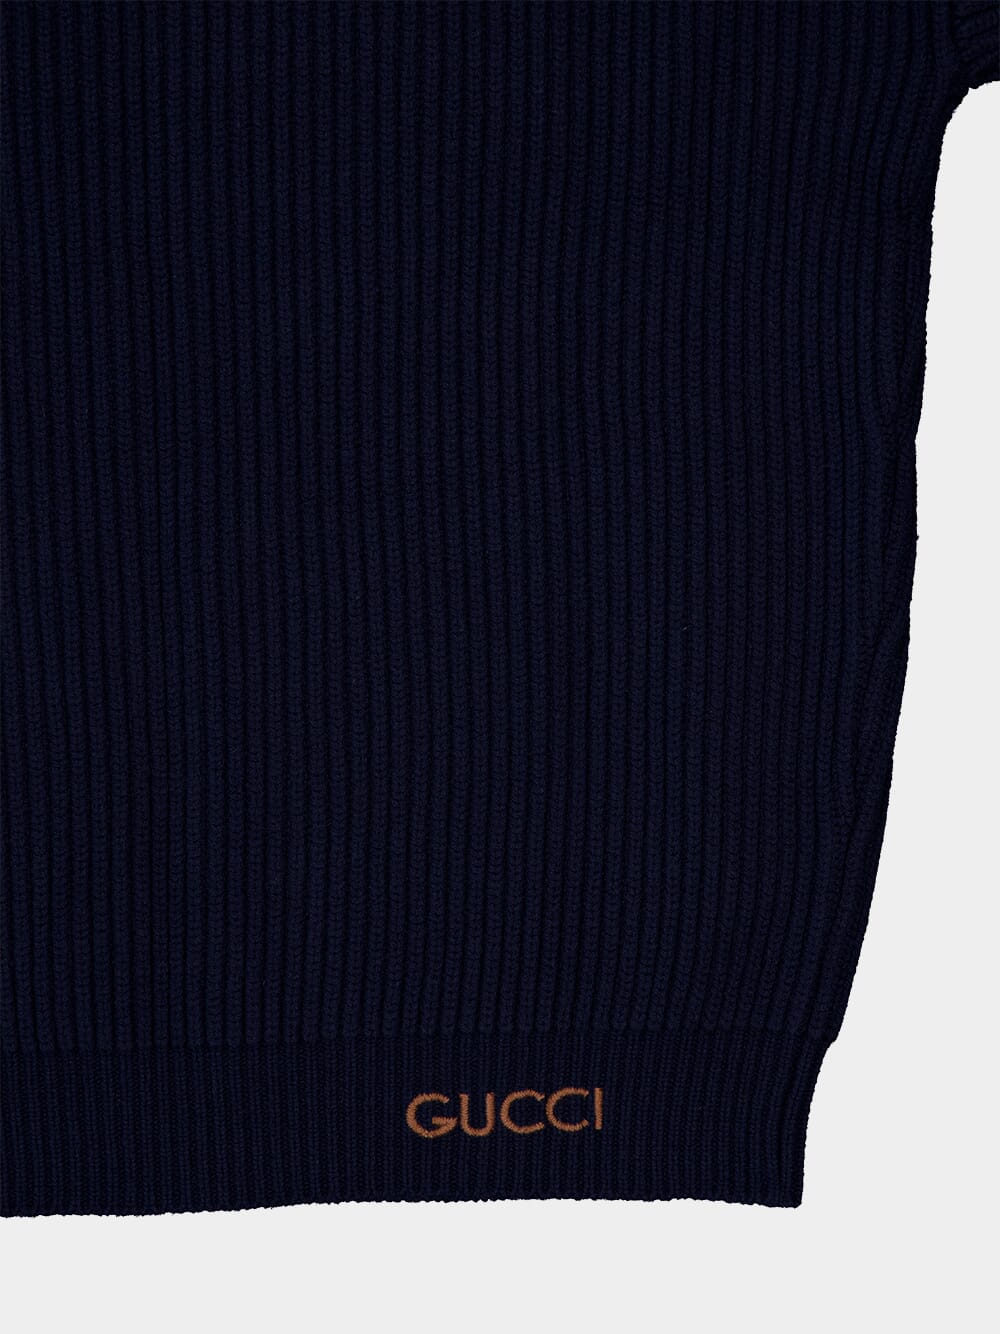 GucciWool Cashmere Zip Sweater at Fashion Clinic